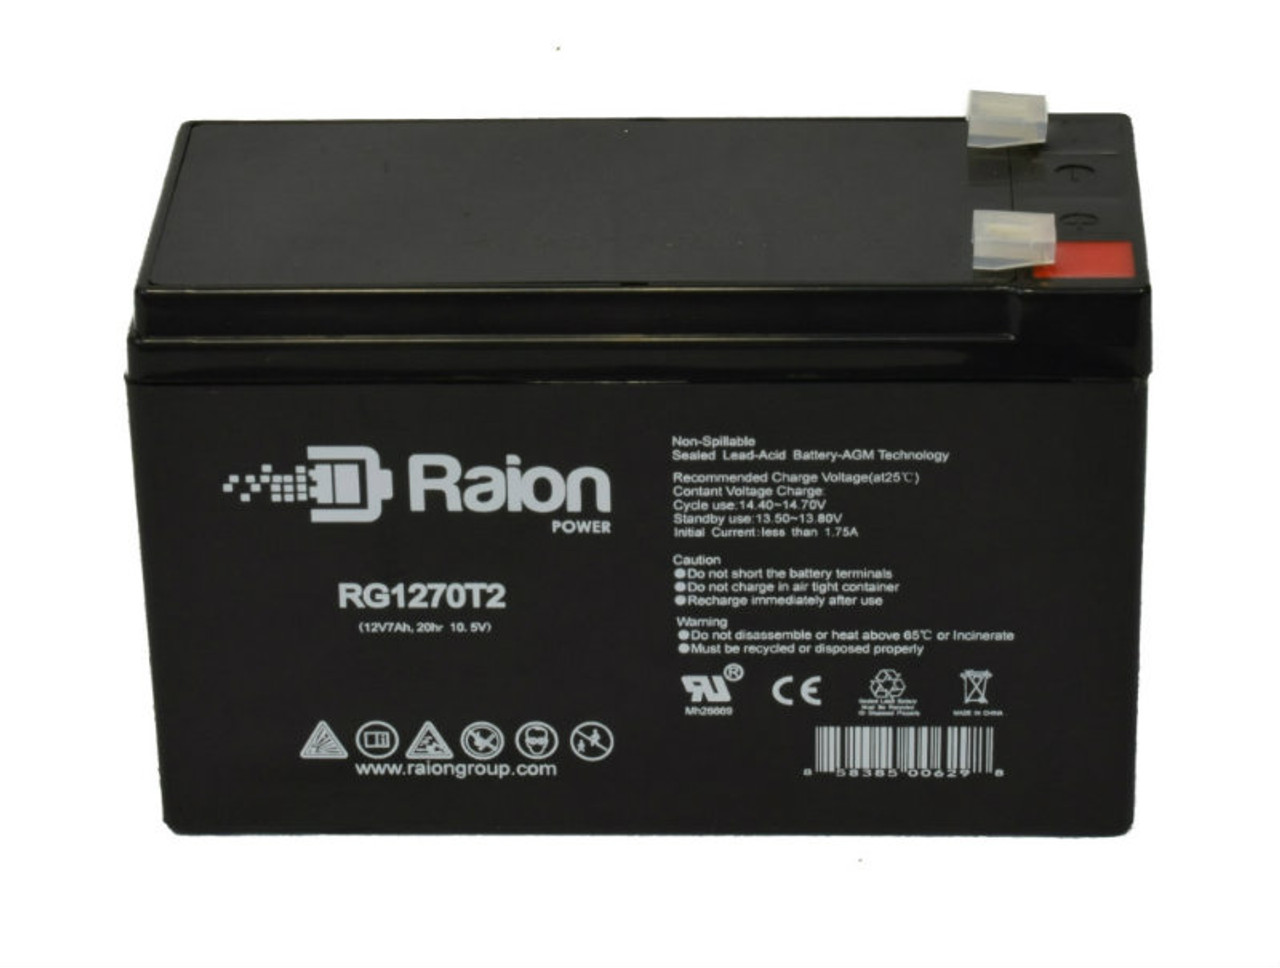 Raion Power RG1270T2 12V 7Ah Lead Acid Battery for Razor 13113697 E300 Electric Scooter Red